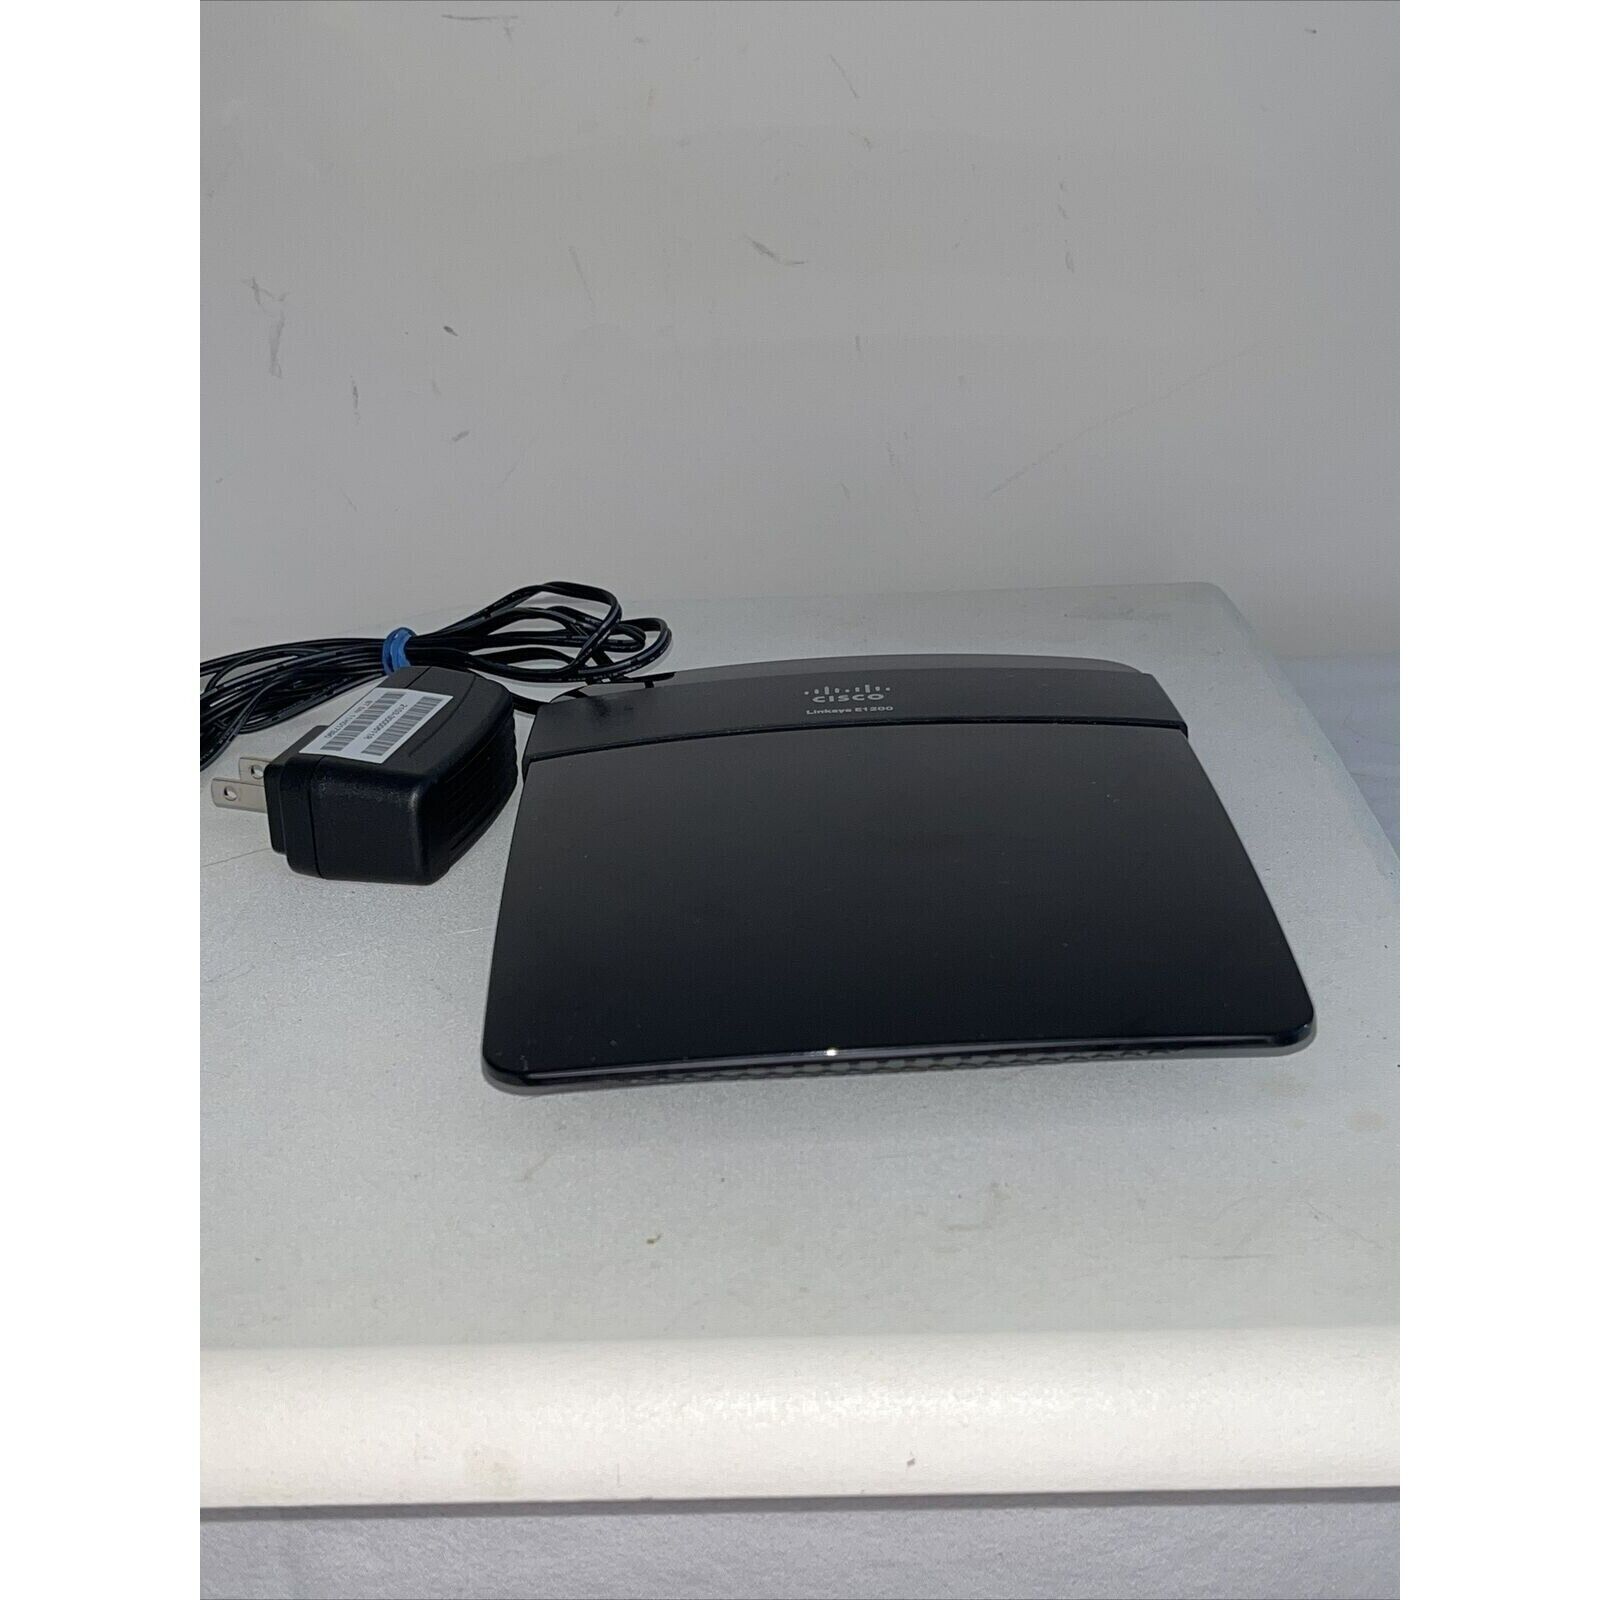 Cisco Linksys E1200 4-Port Gigabit Ethernet Dual-Band Wireless Router Only